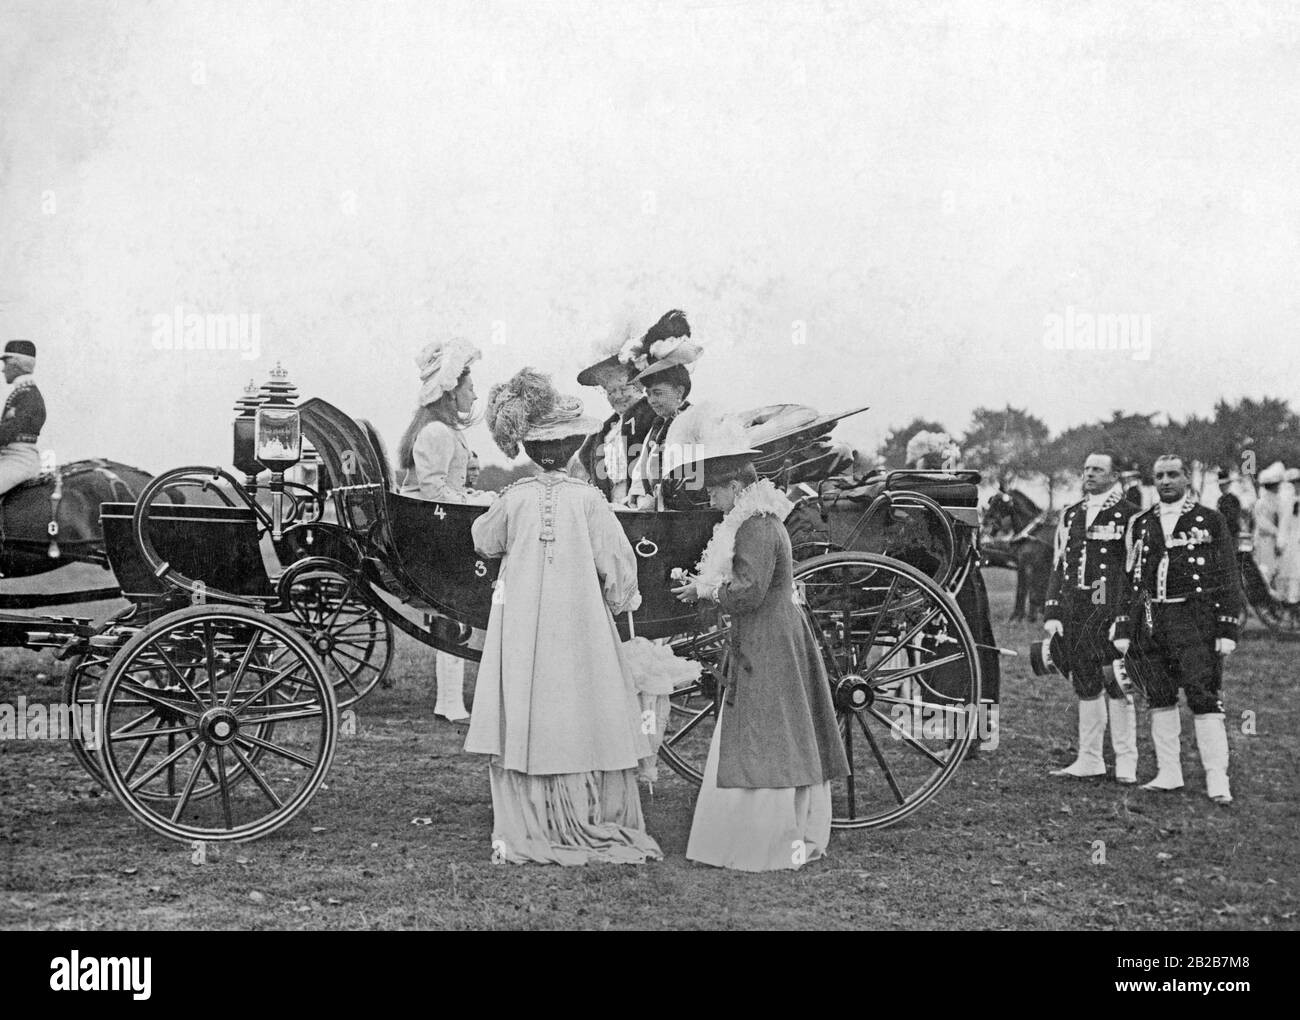 The big parades on the Tempelhofer Feld in Berlin were important social occasions in spring and autumn, at which the high nobility was also present. Here from left to right: Princess Victoria Louise, Crown Princess Cecilie, Empress Augusta Victoria and Crown Princess Sophie of Greece. Stock Photo